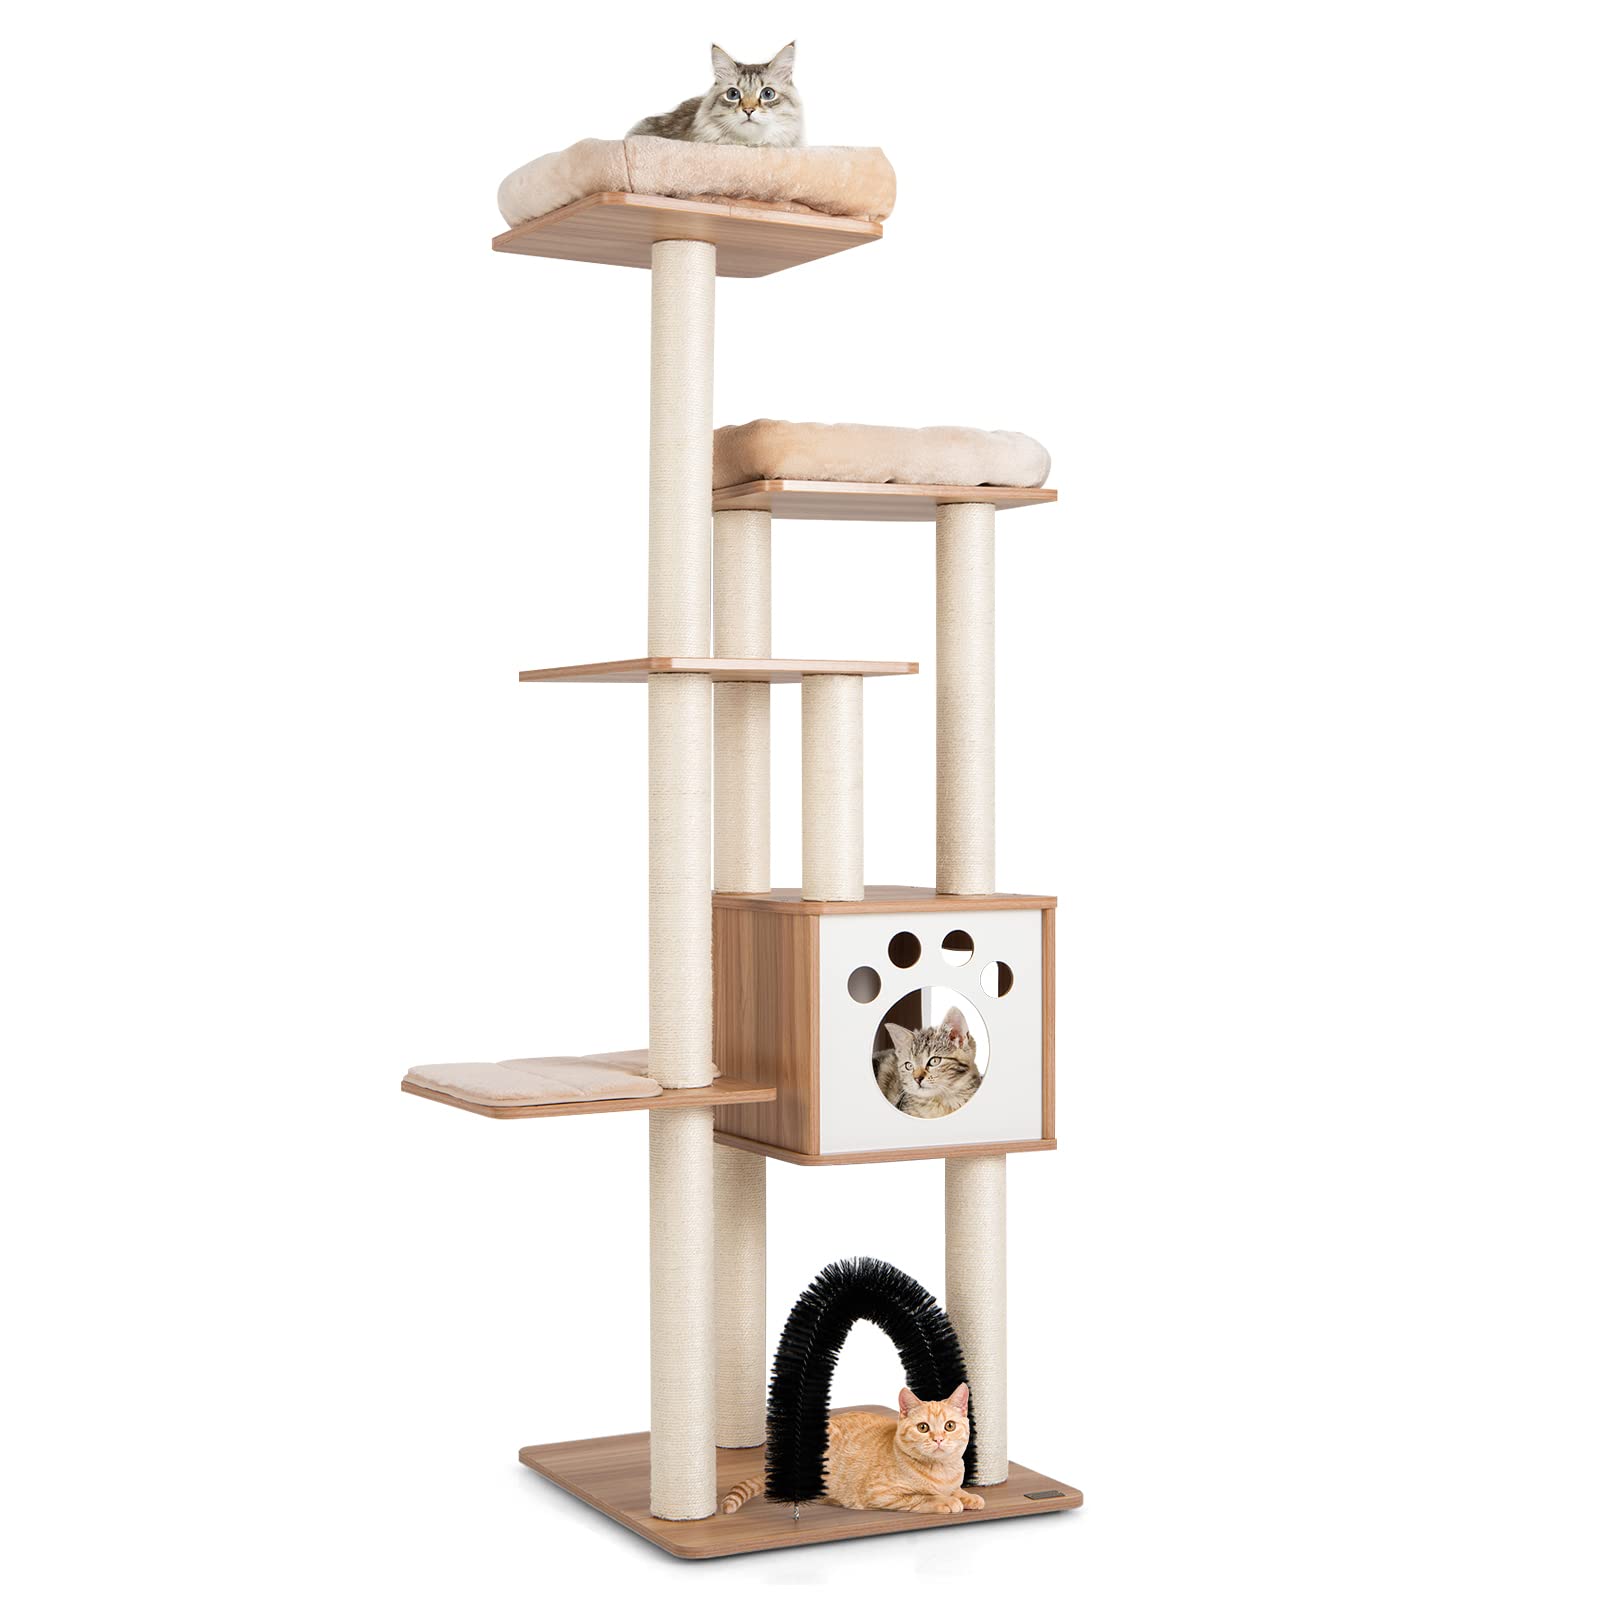 Tangkula Modern Cat Tree for Indoor Cats, 69.5 Inches Tall Cute Cat Tree with 2 Top Plush Perches